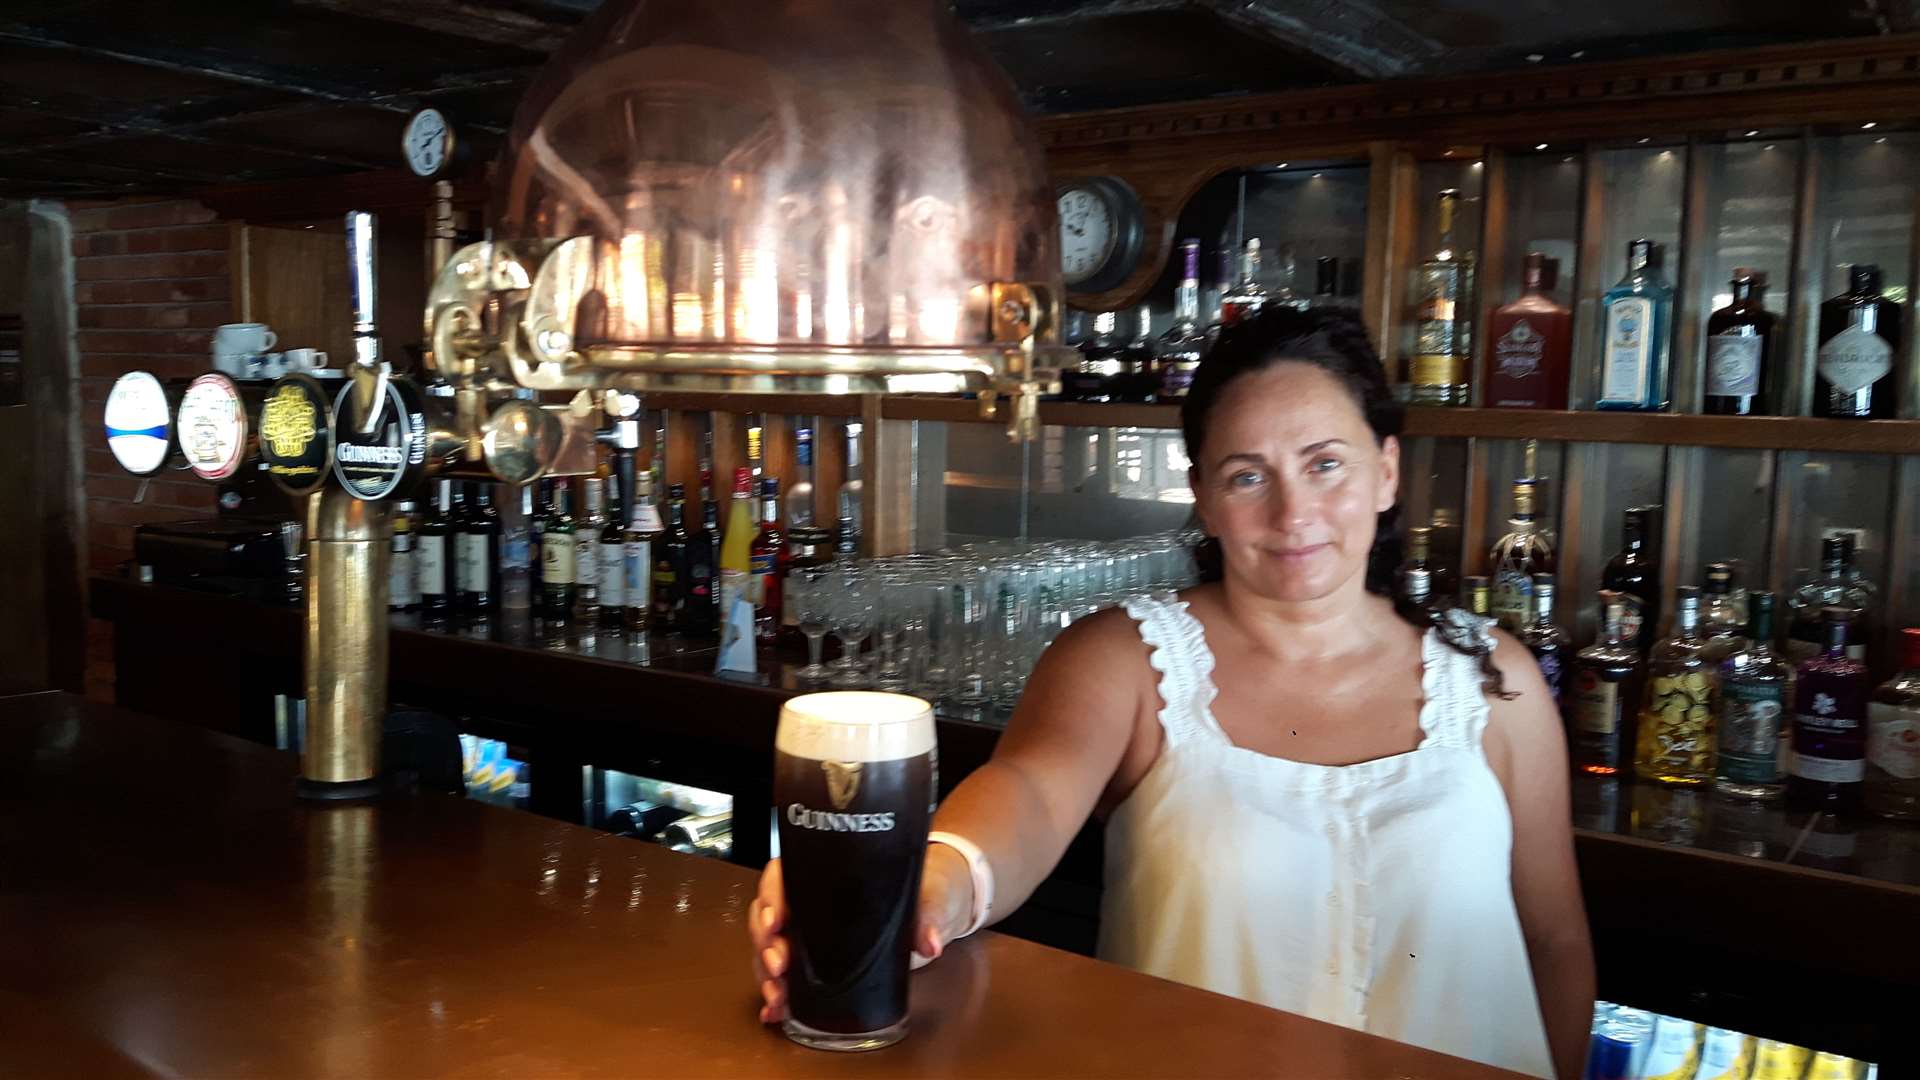 Sarah O'Quigley is ready with the Guinness